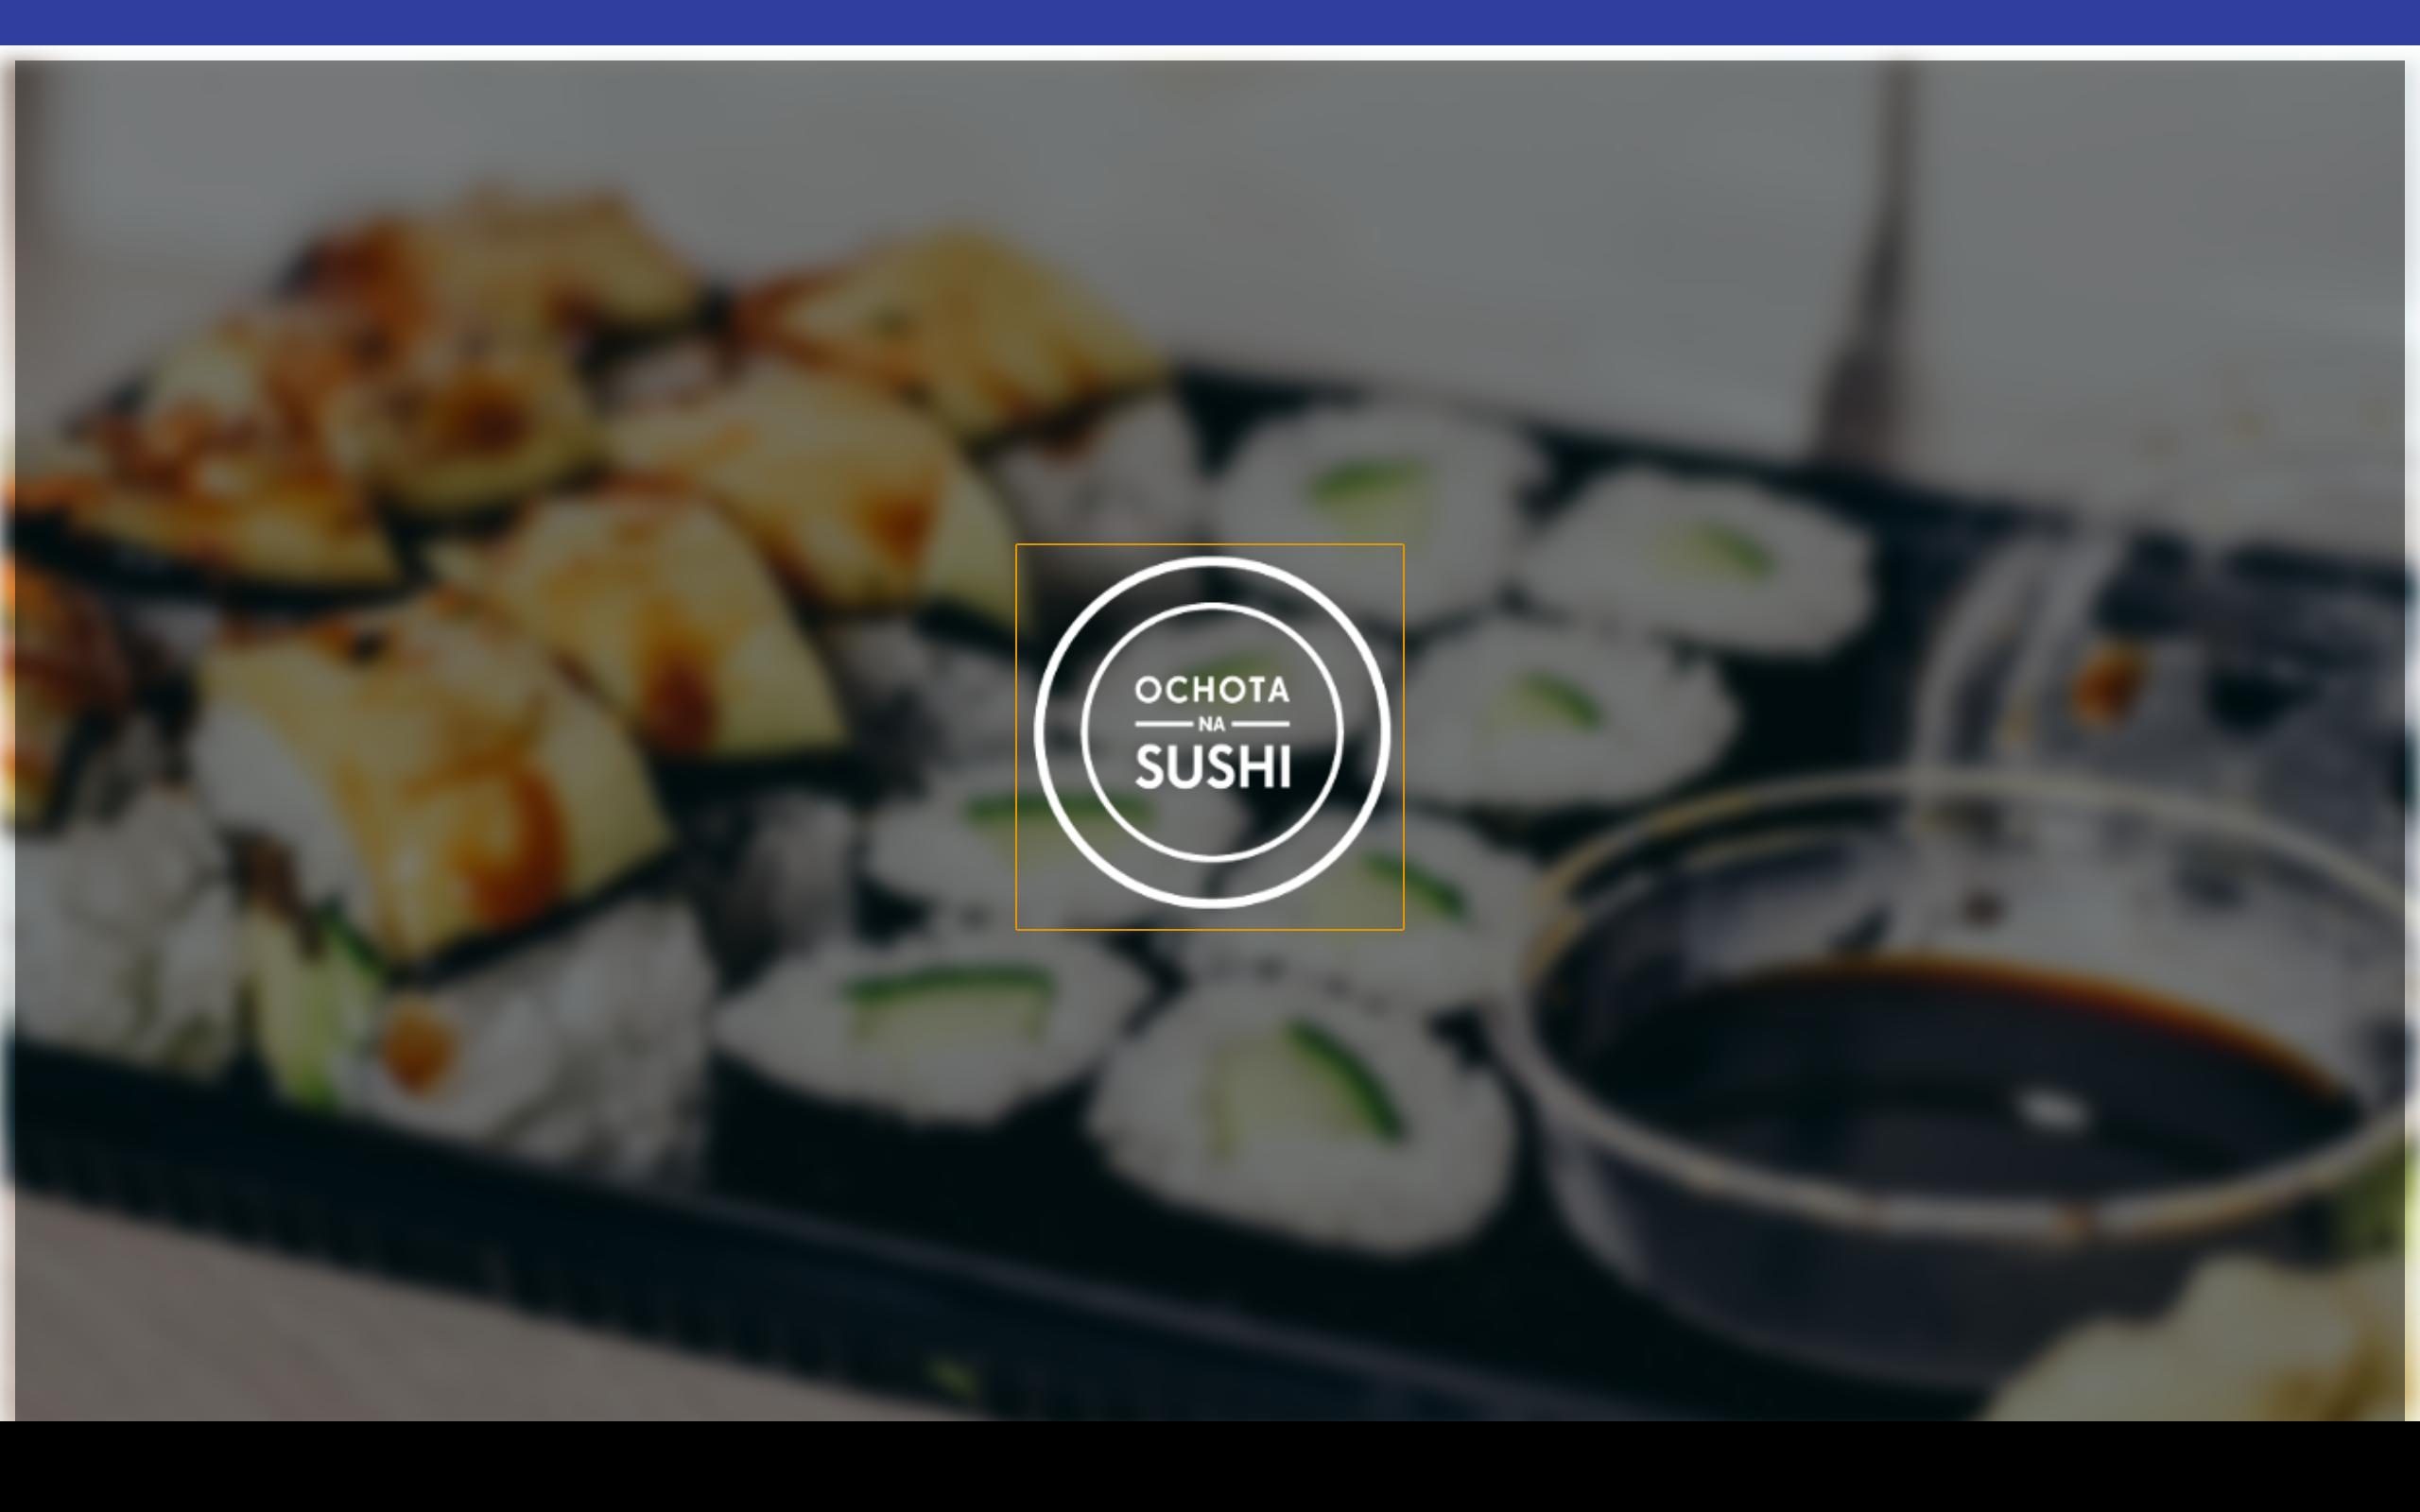 Ochota na Sushi for Android - APK Download